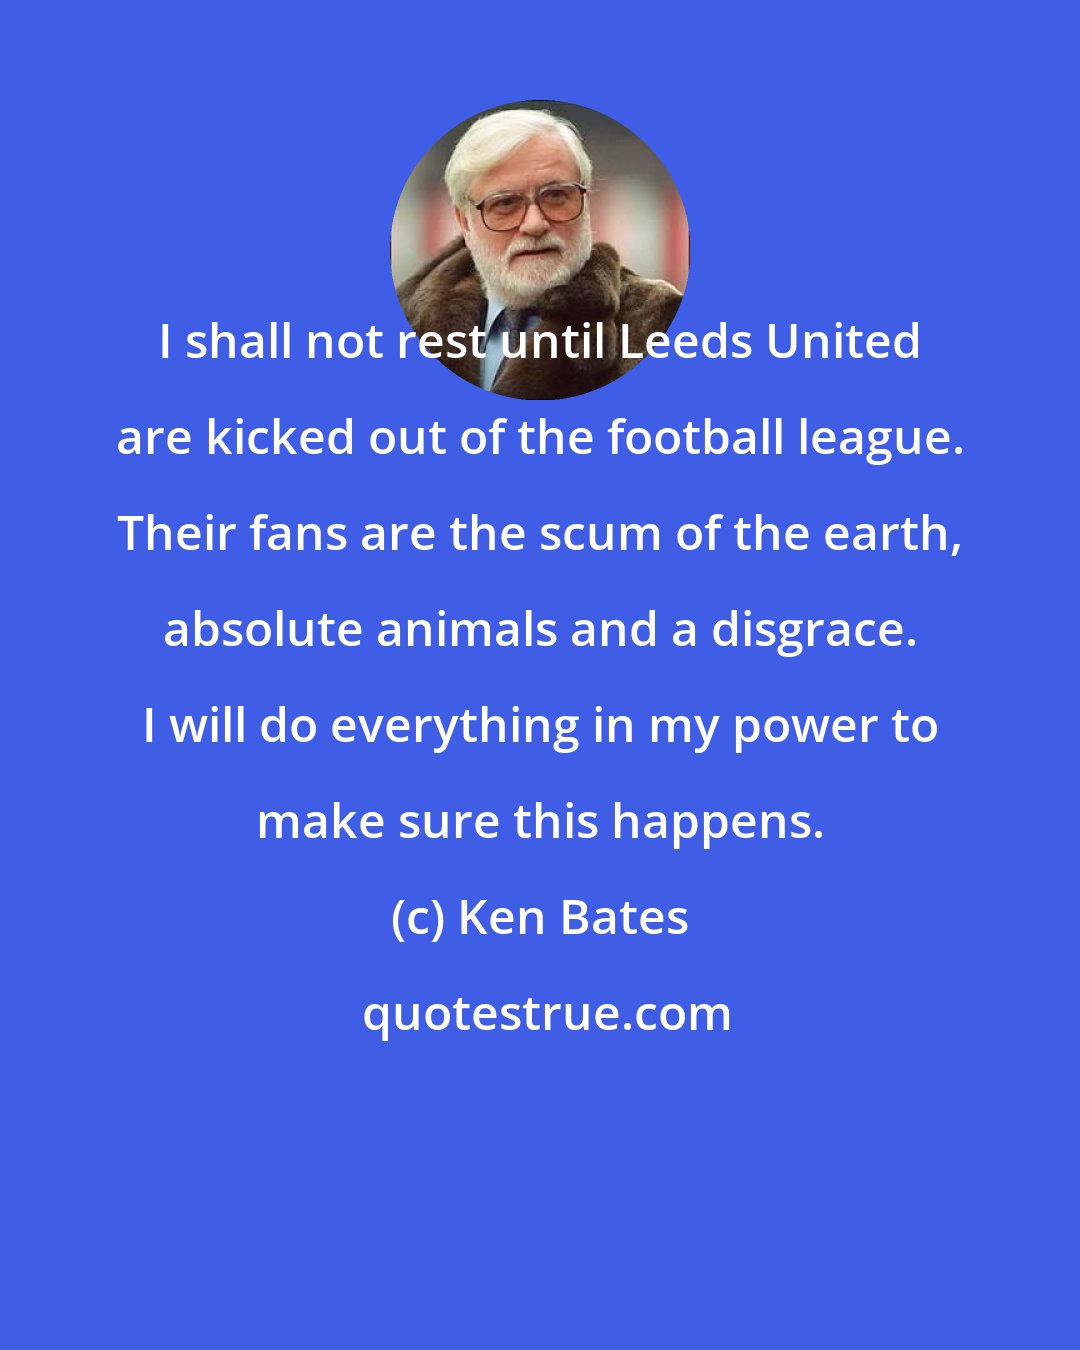 Ken Bates: I shall not rest until Leeds United are kicked out of the football league. Their fans are the scum of the earth, absolute animals and a disgrace. I will do everything in my power to make sure this happens.